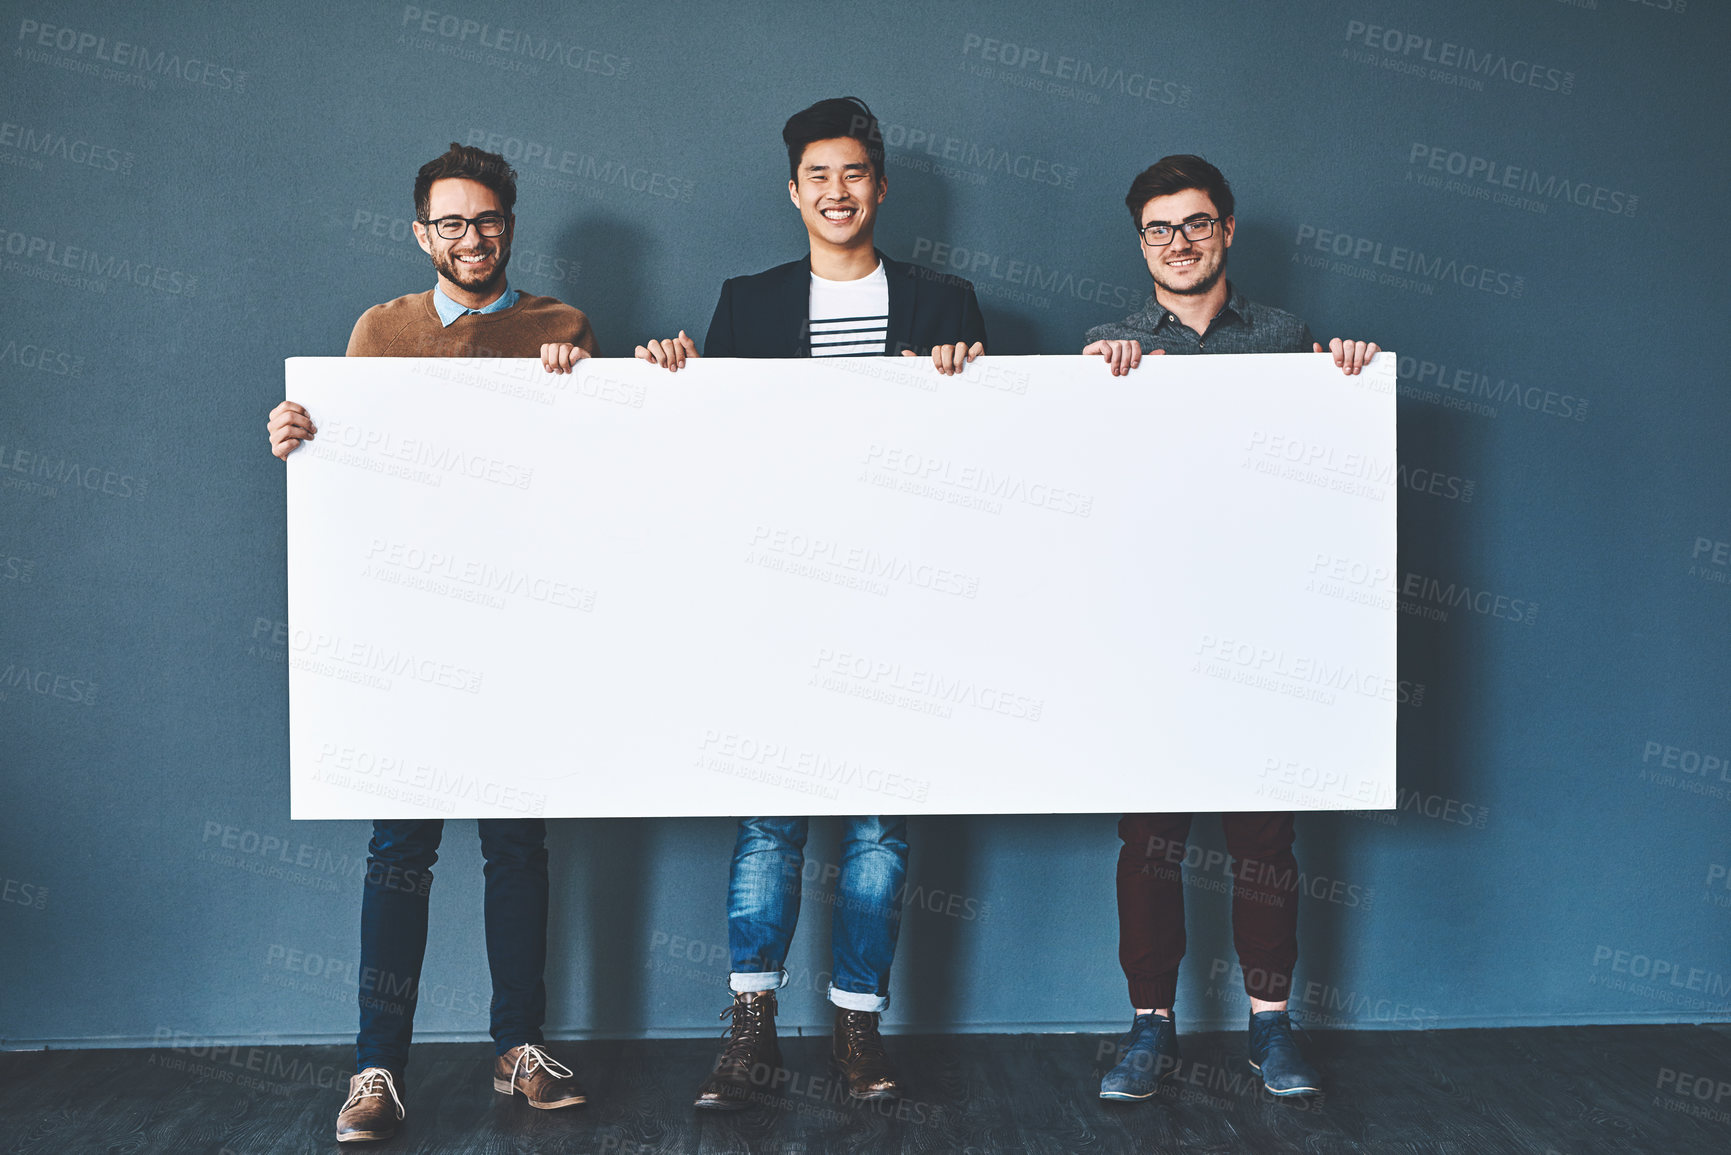 Buy stock photo Studio shot of businesspeople holding up a blank sign against a grey background